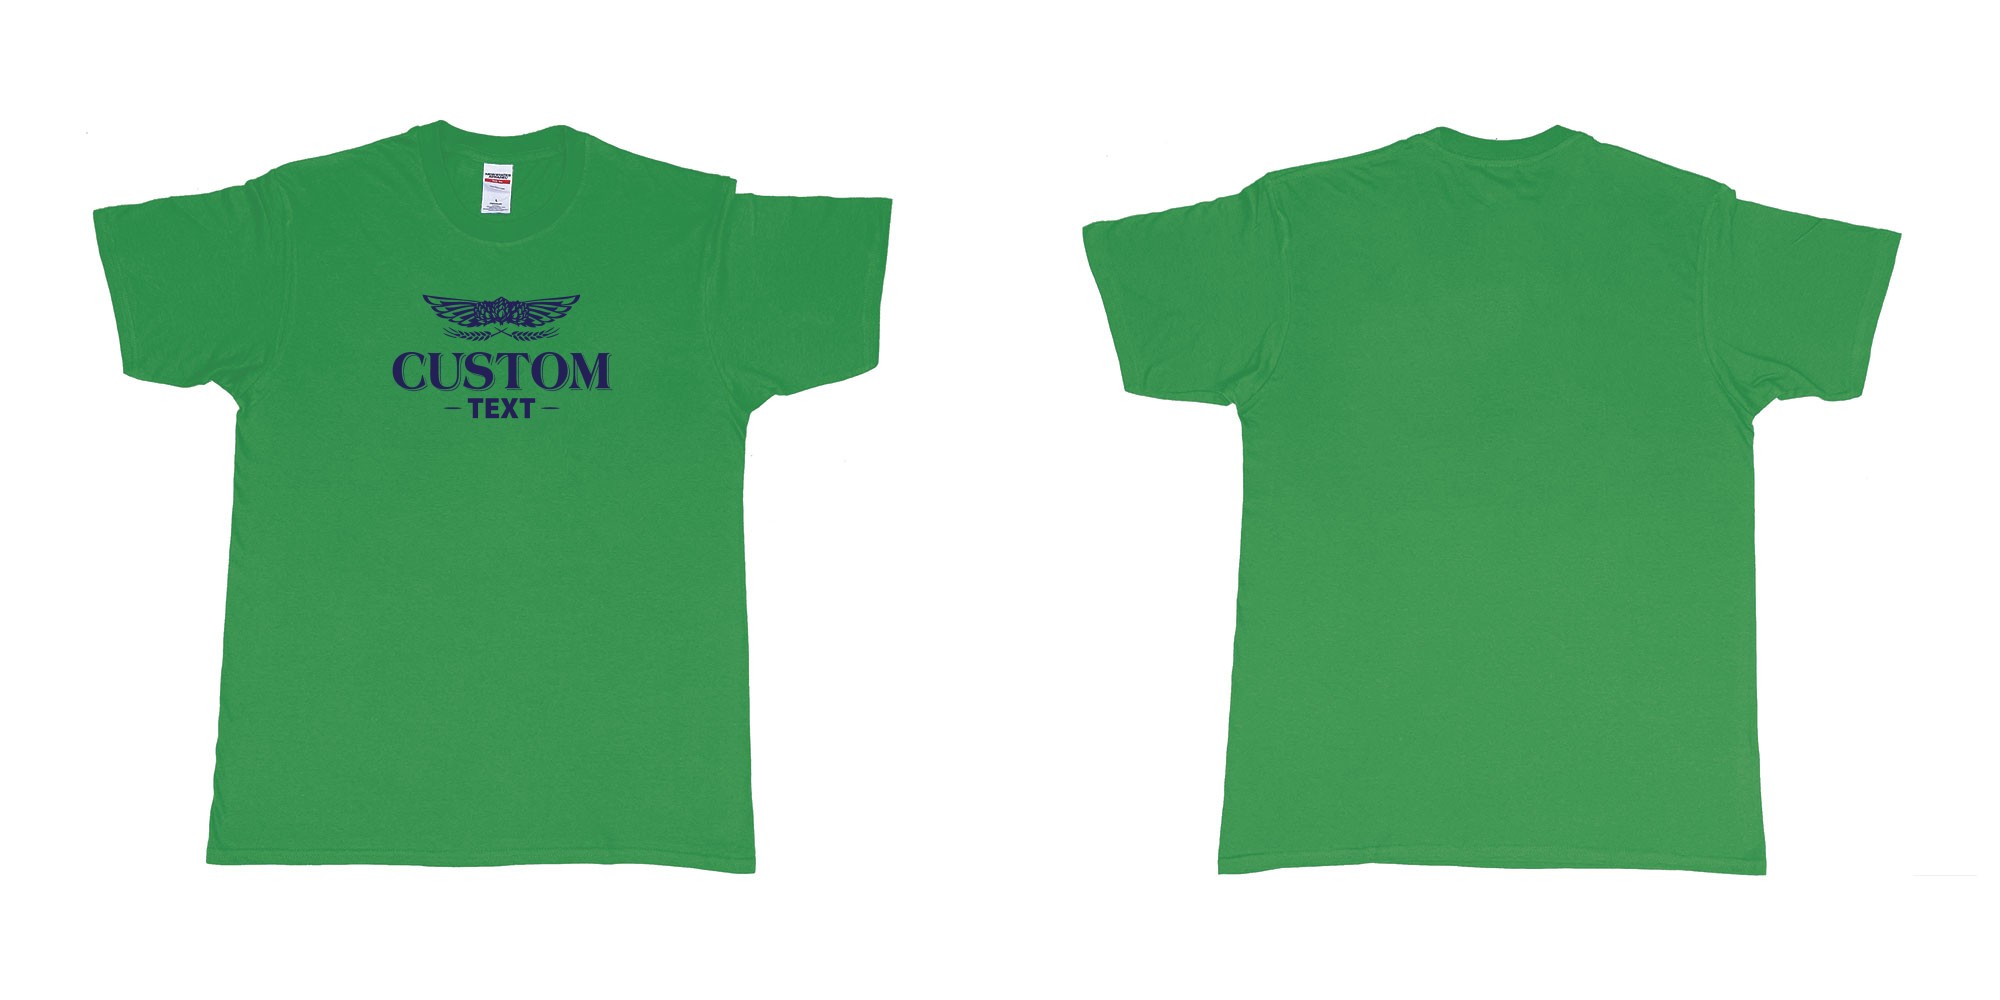 Custom tshirt design prost beer custom print text in fabric color irish-green choice your own text made in Bali by The Pirate Way